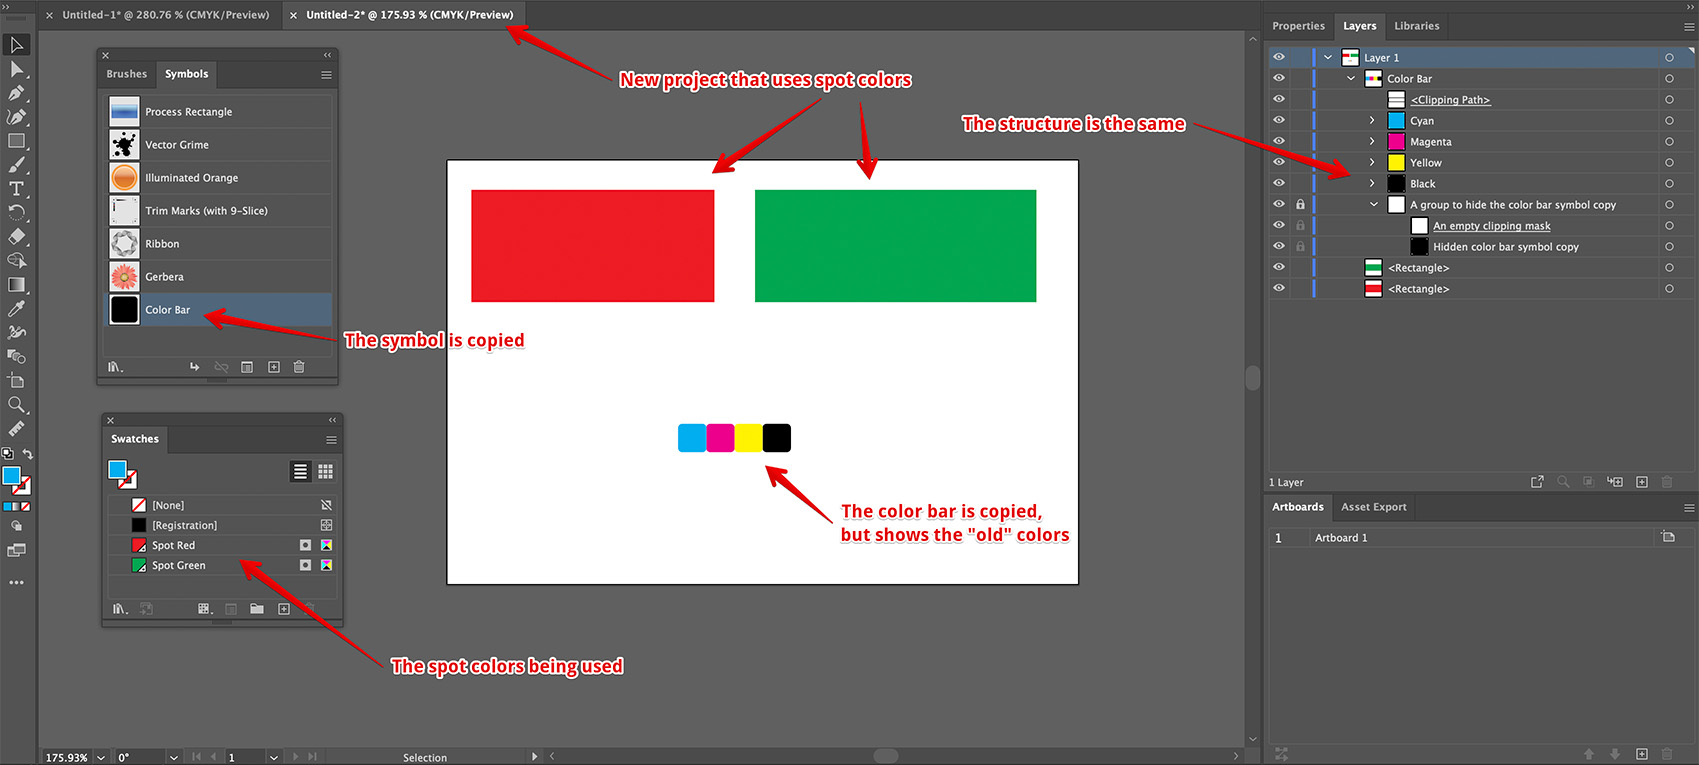 Pasting the color bar into another project